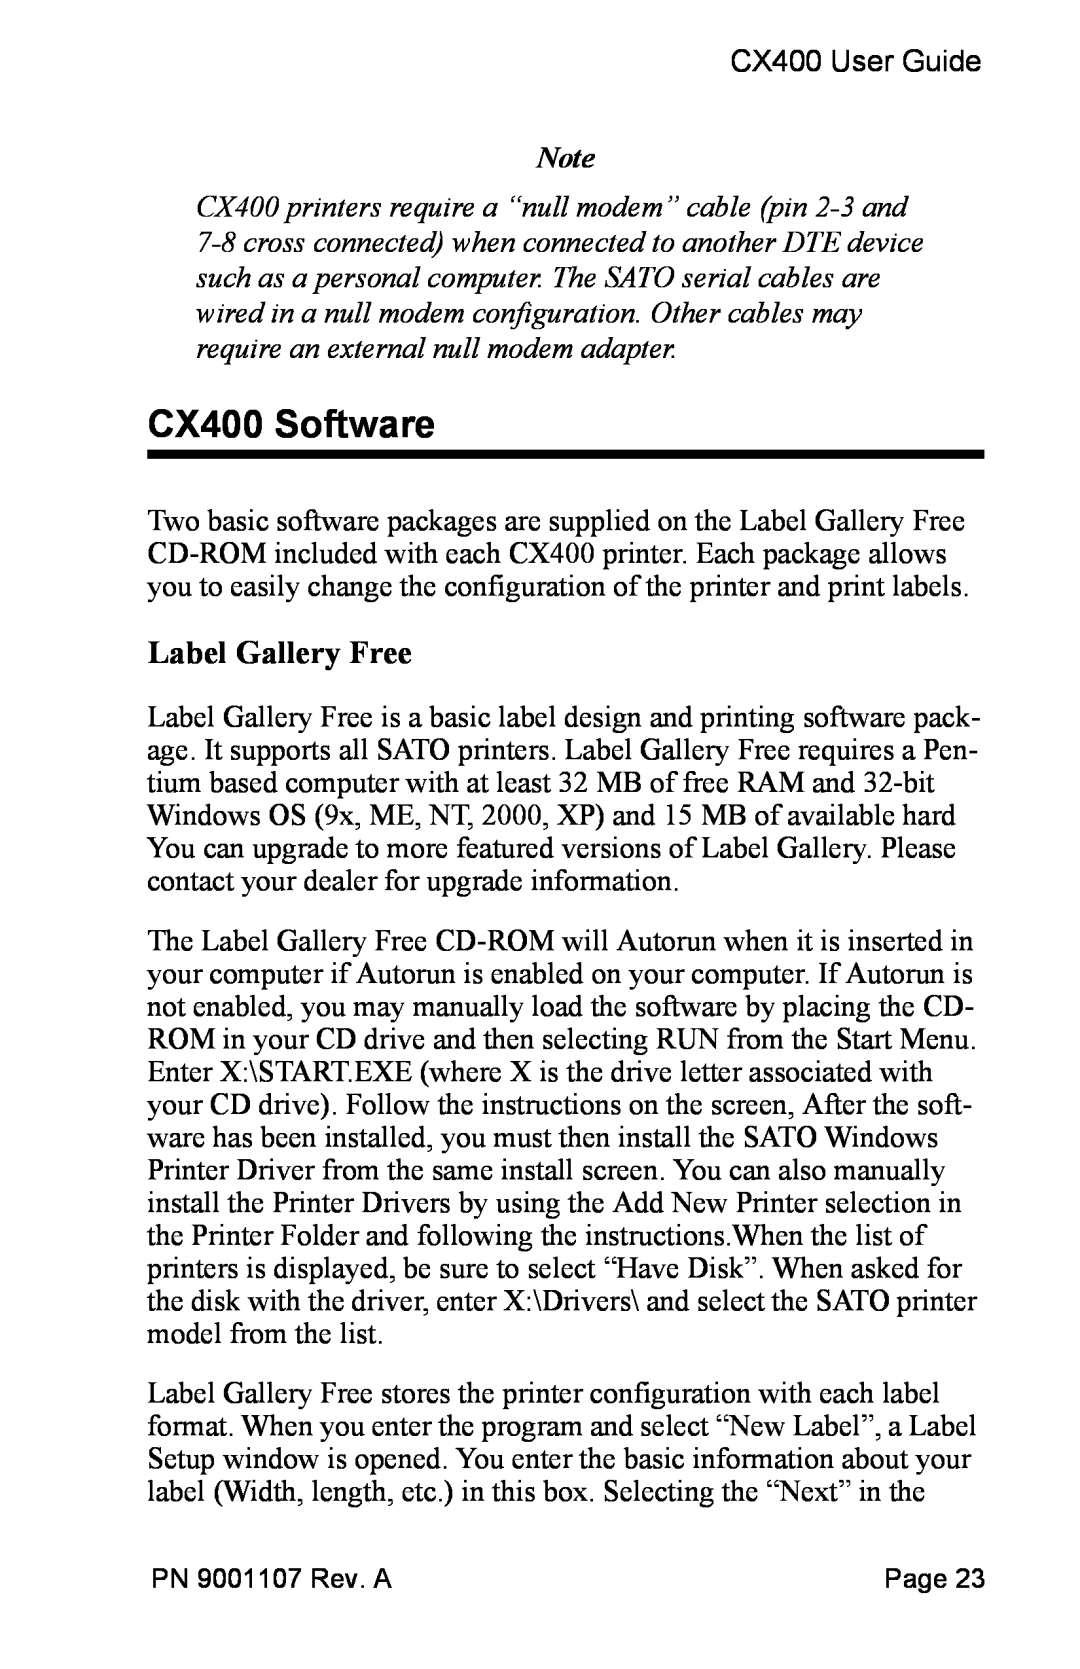 SATO manual CX400 Software, Label Gallery Free, CX400 printers require a “null modem” cable pin 2-3 and 